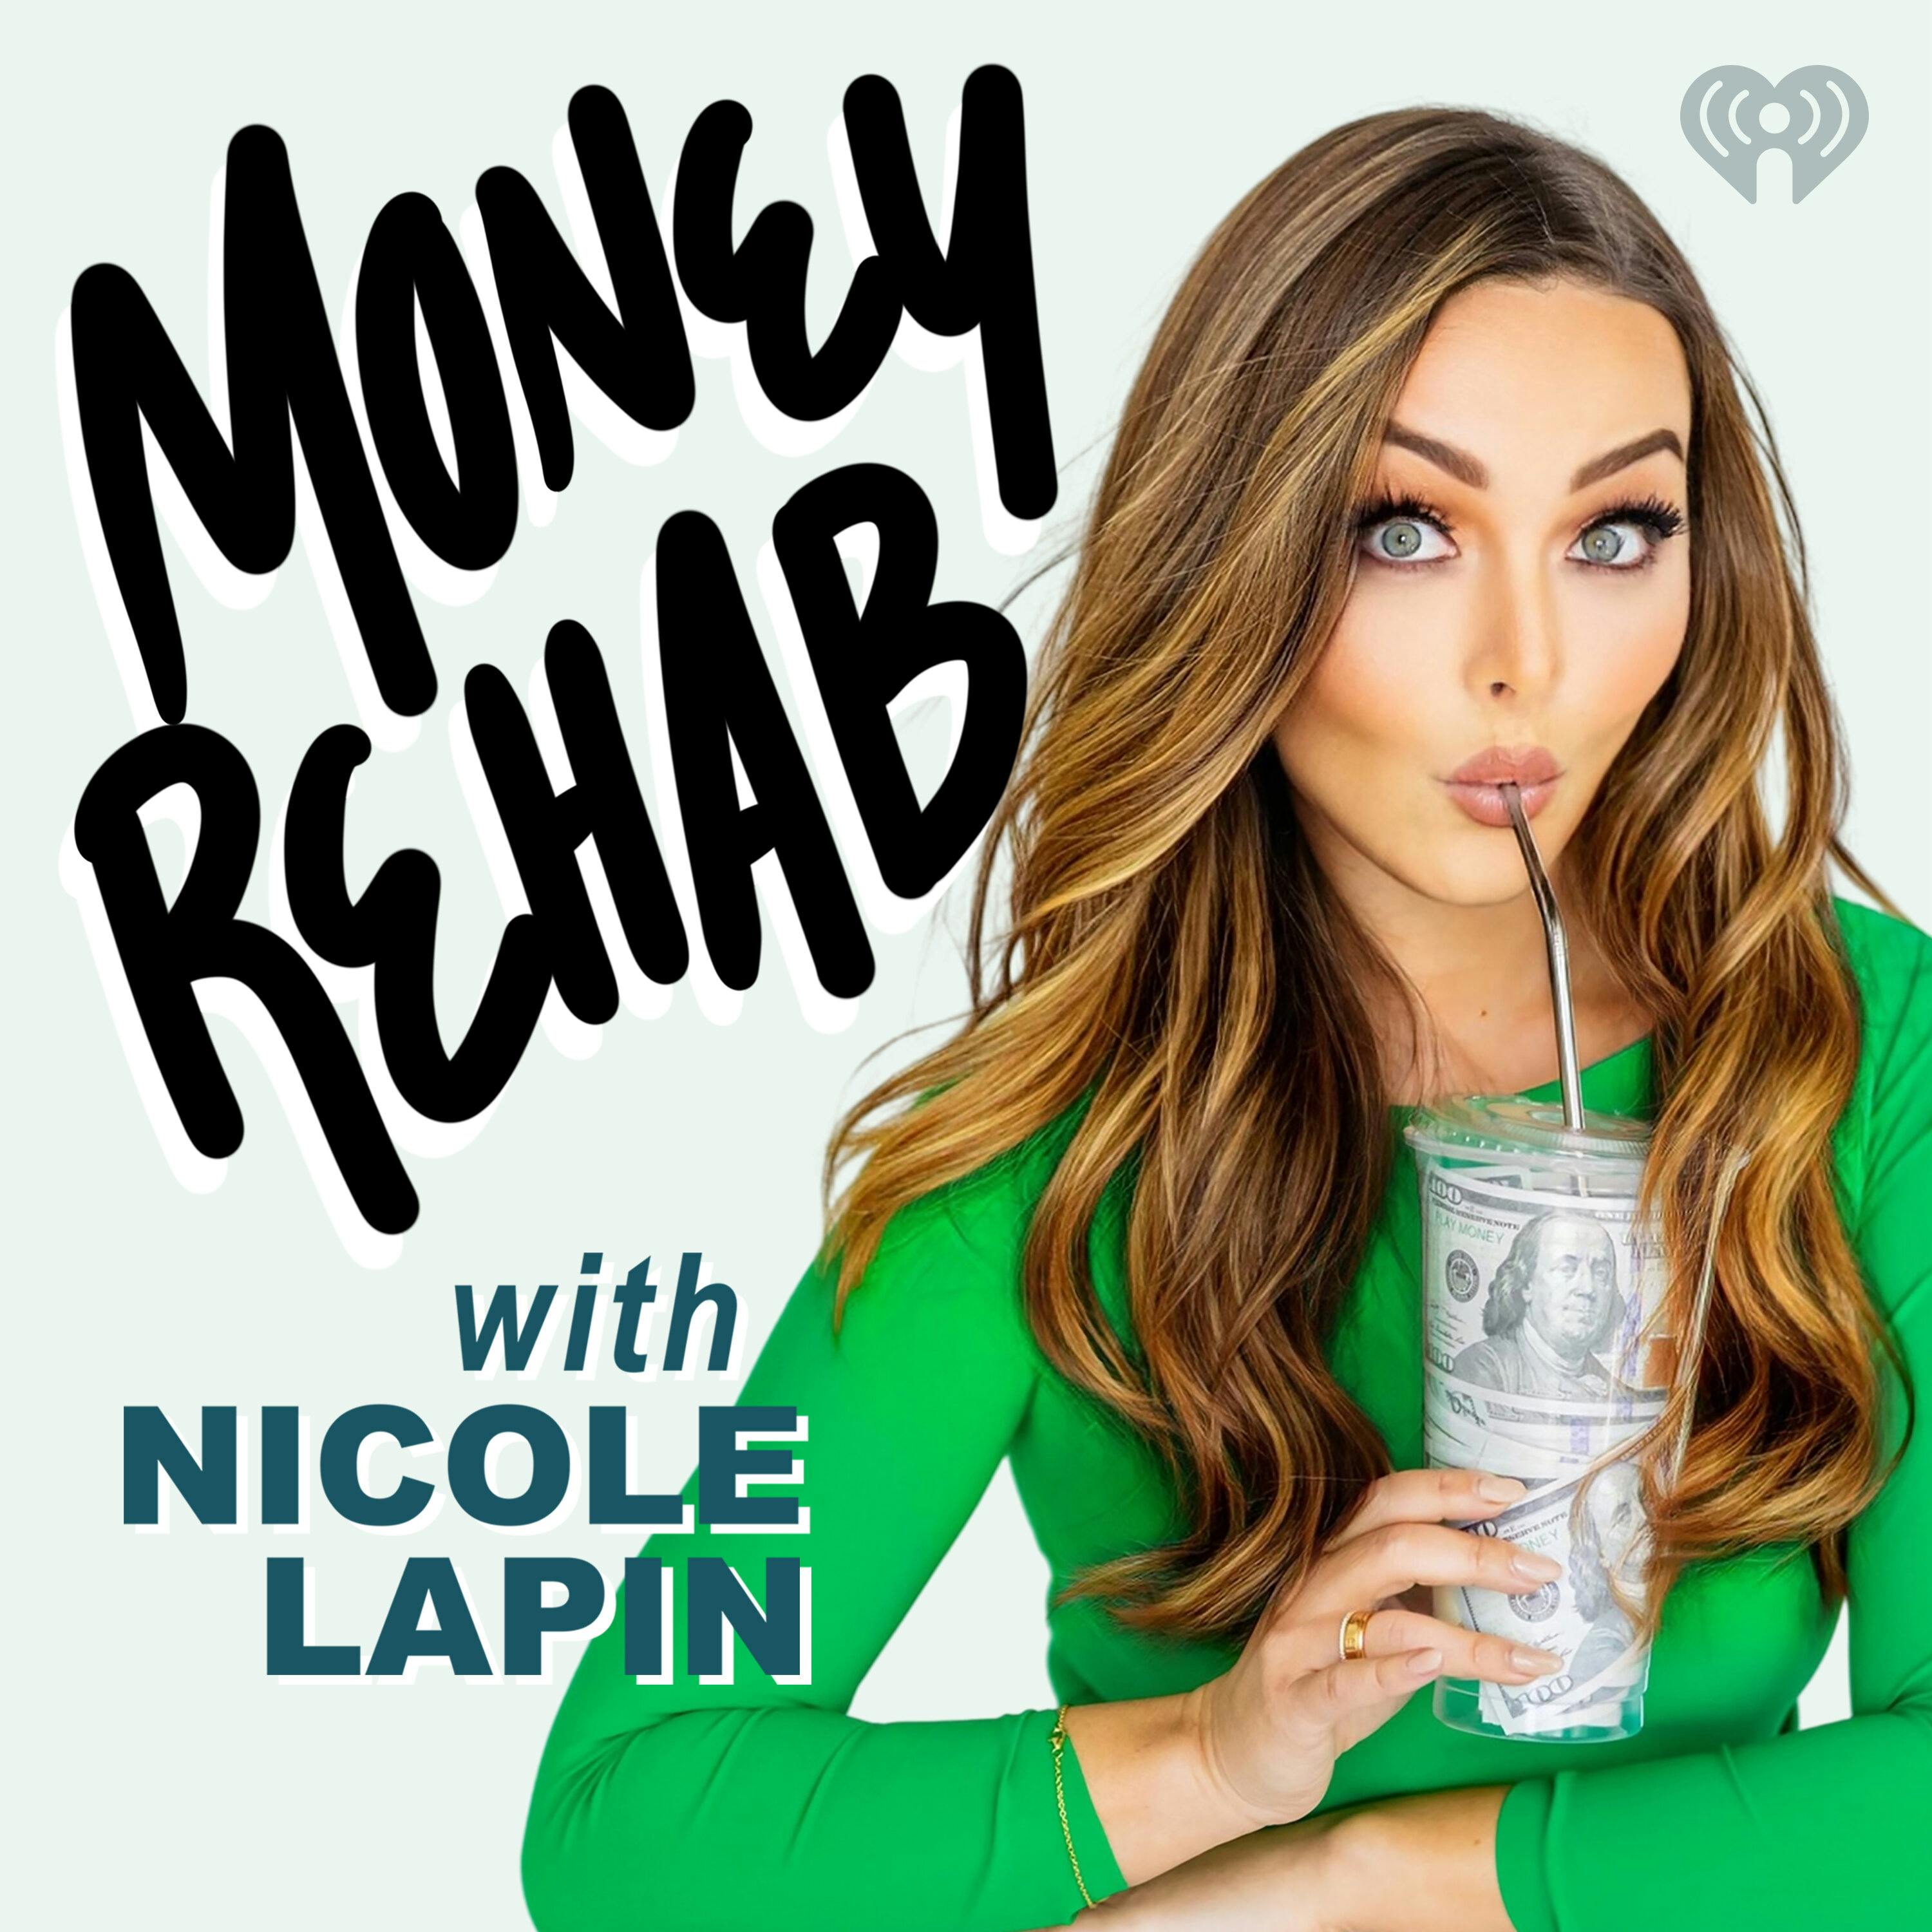 Encore: “I don’t have a penny in savings. What should I do? ” (Listener Intervention)